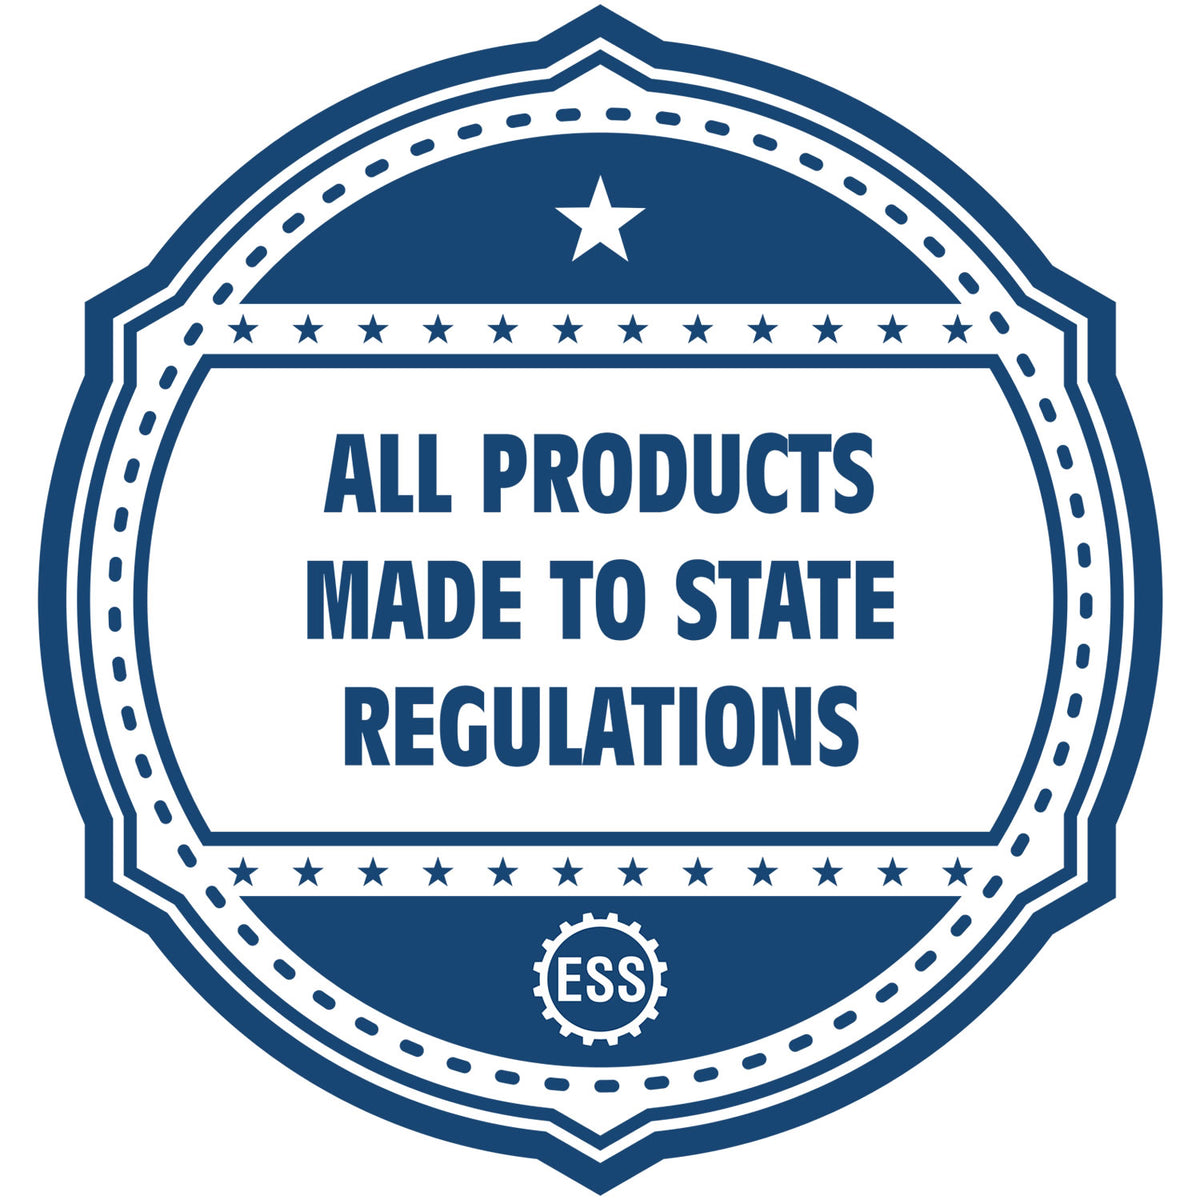 A blue icon or badge for the Hybrid Louisiana Architect Seal showing that this product is made in compliance with state regulations.